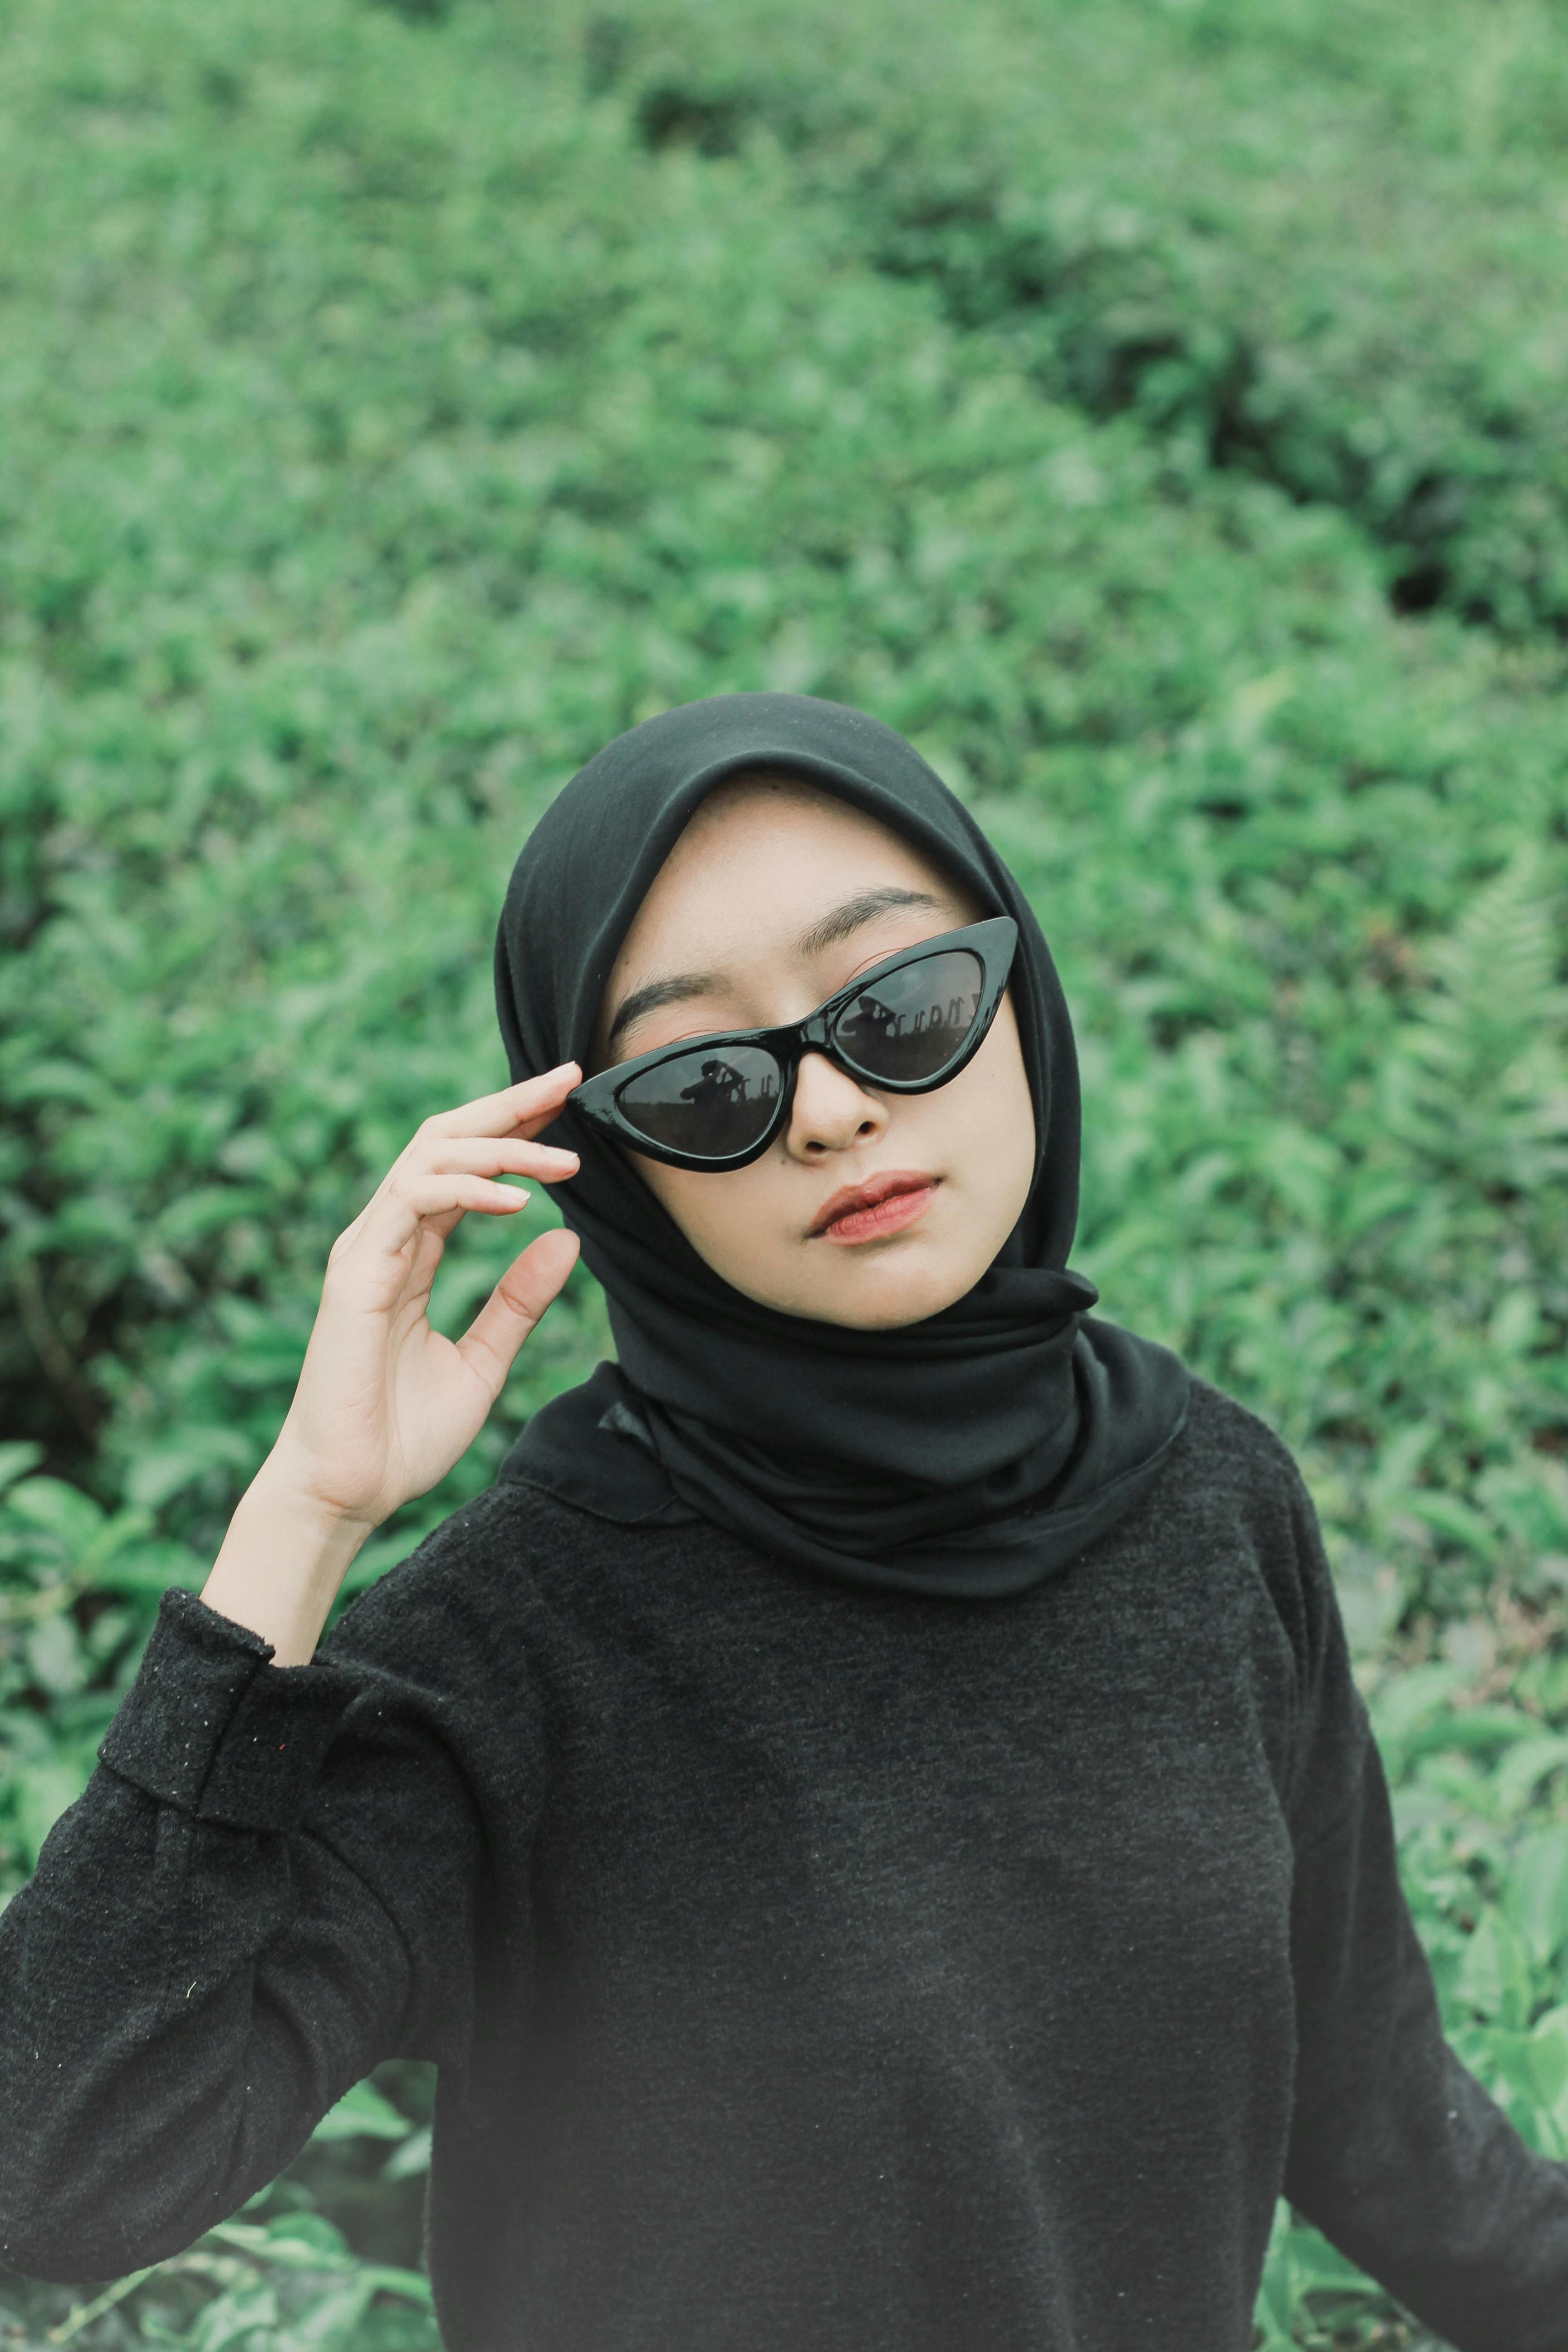 Woman in Black Hijab and Sunglasses · Free Stock Photo